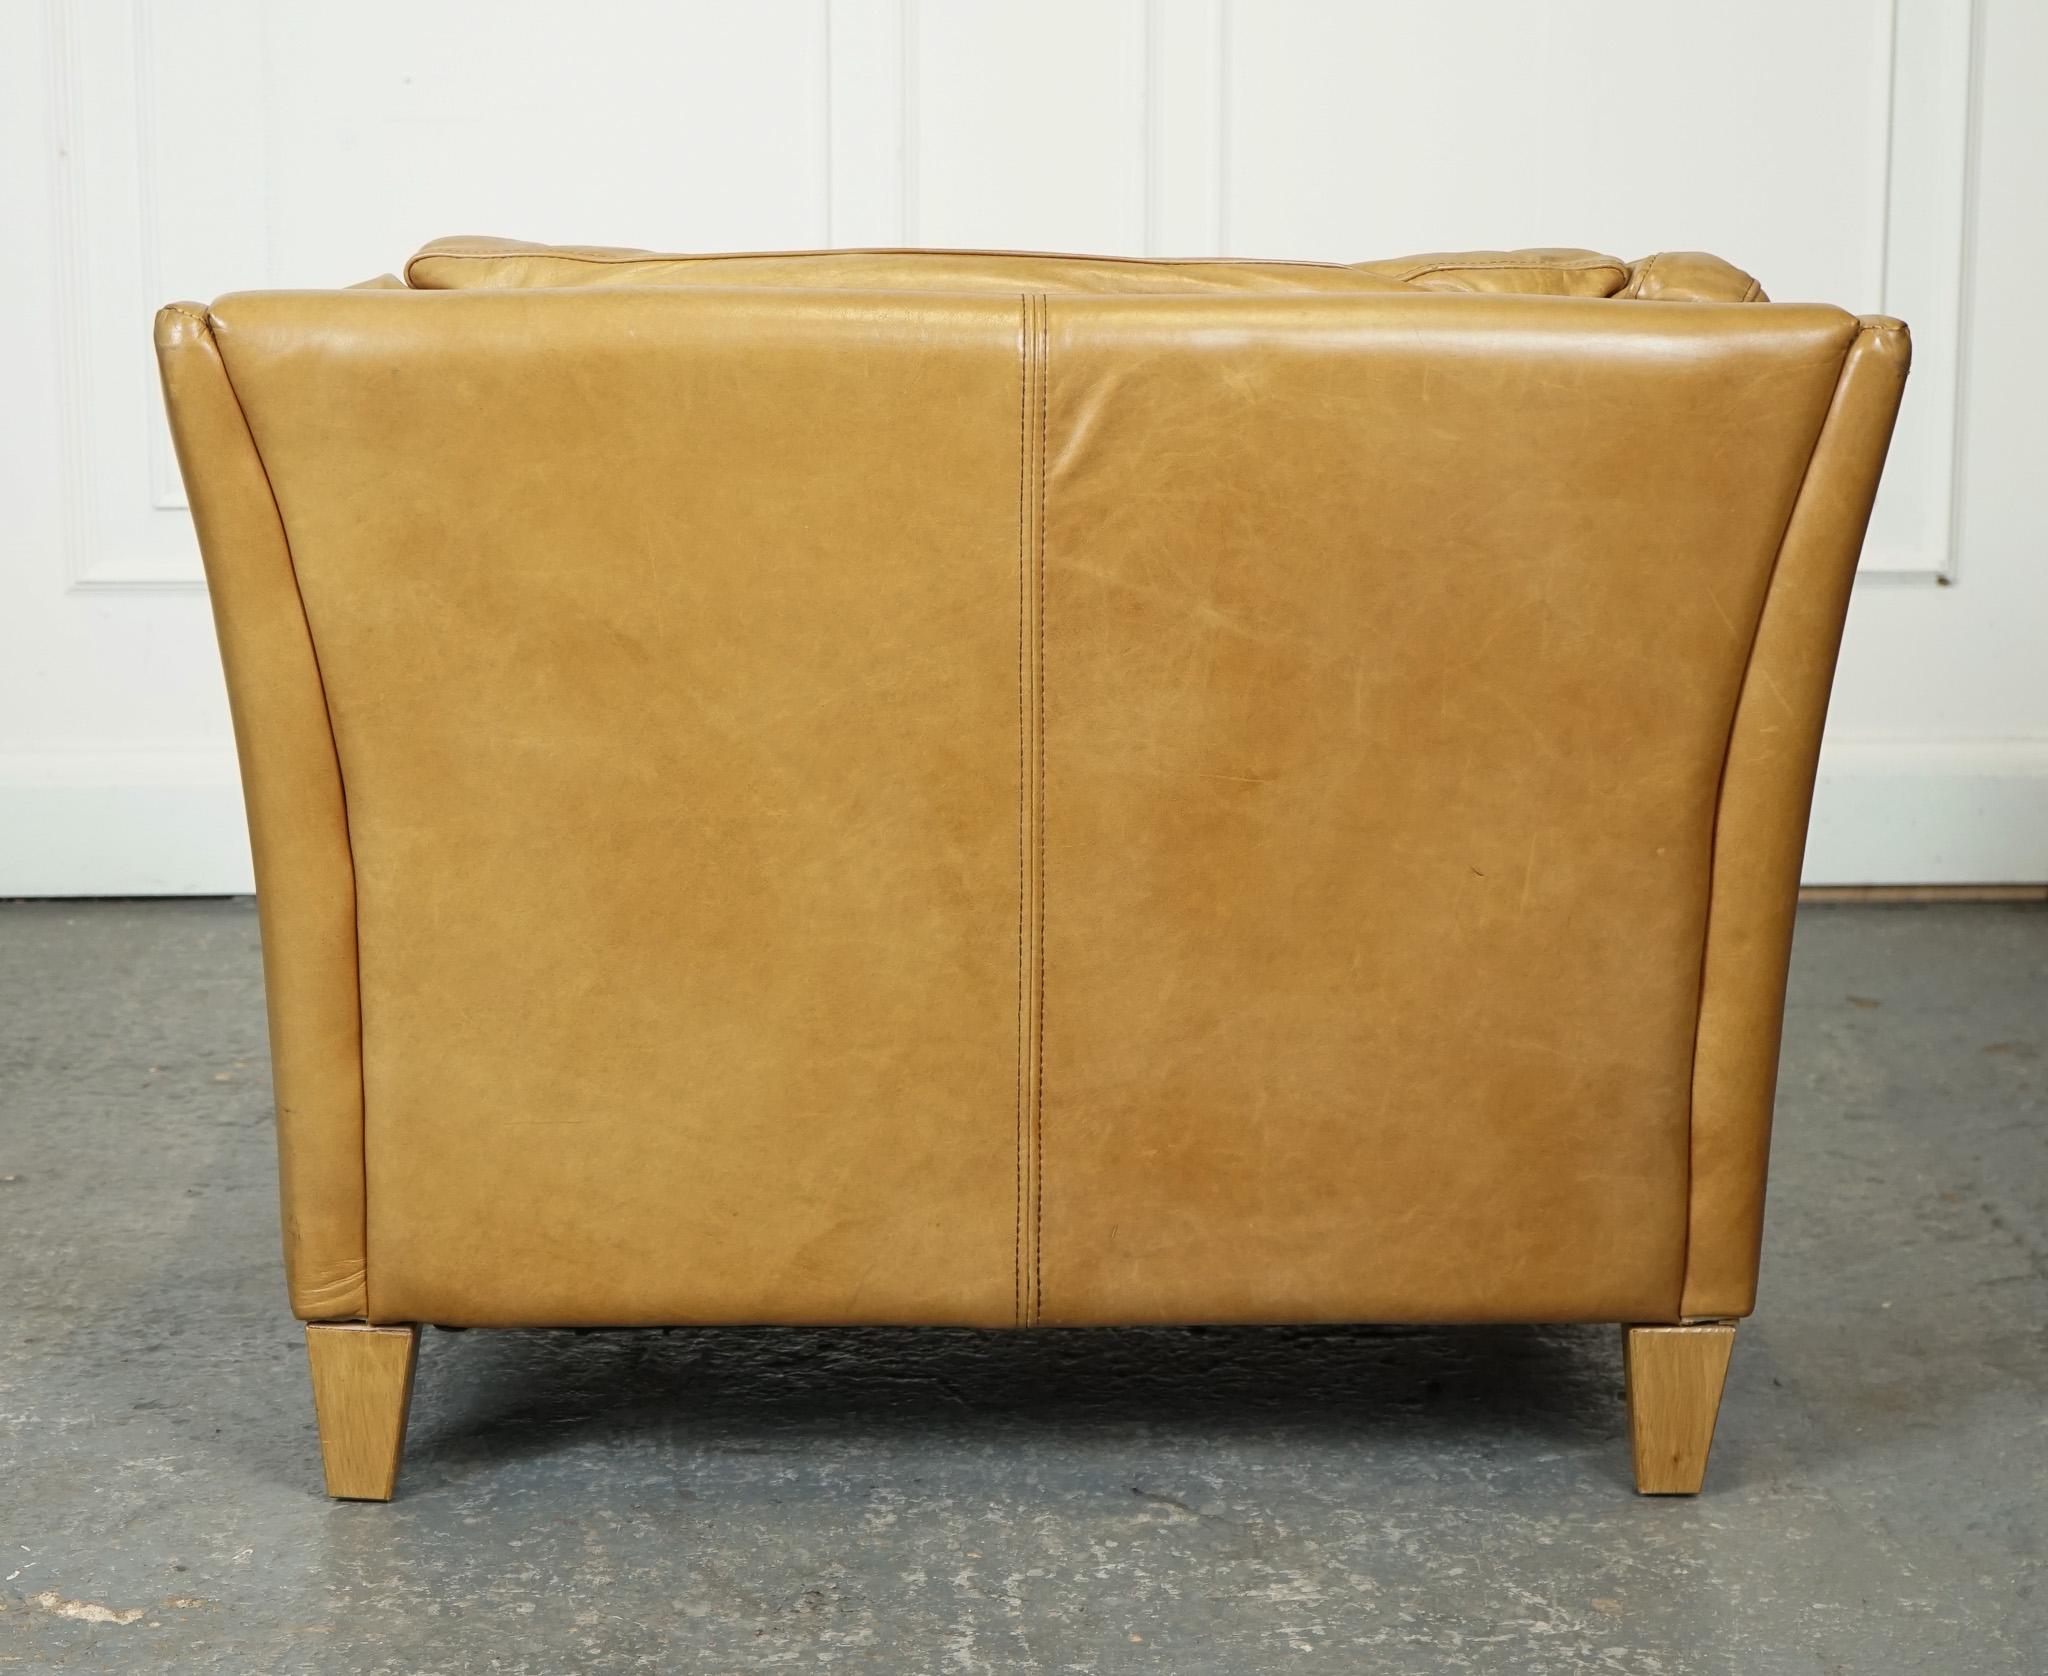 COMPACT AND VERY COMFORTABLE HALO REGGIO Tan LEATHER ARMCHAiR im Angebot 2